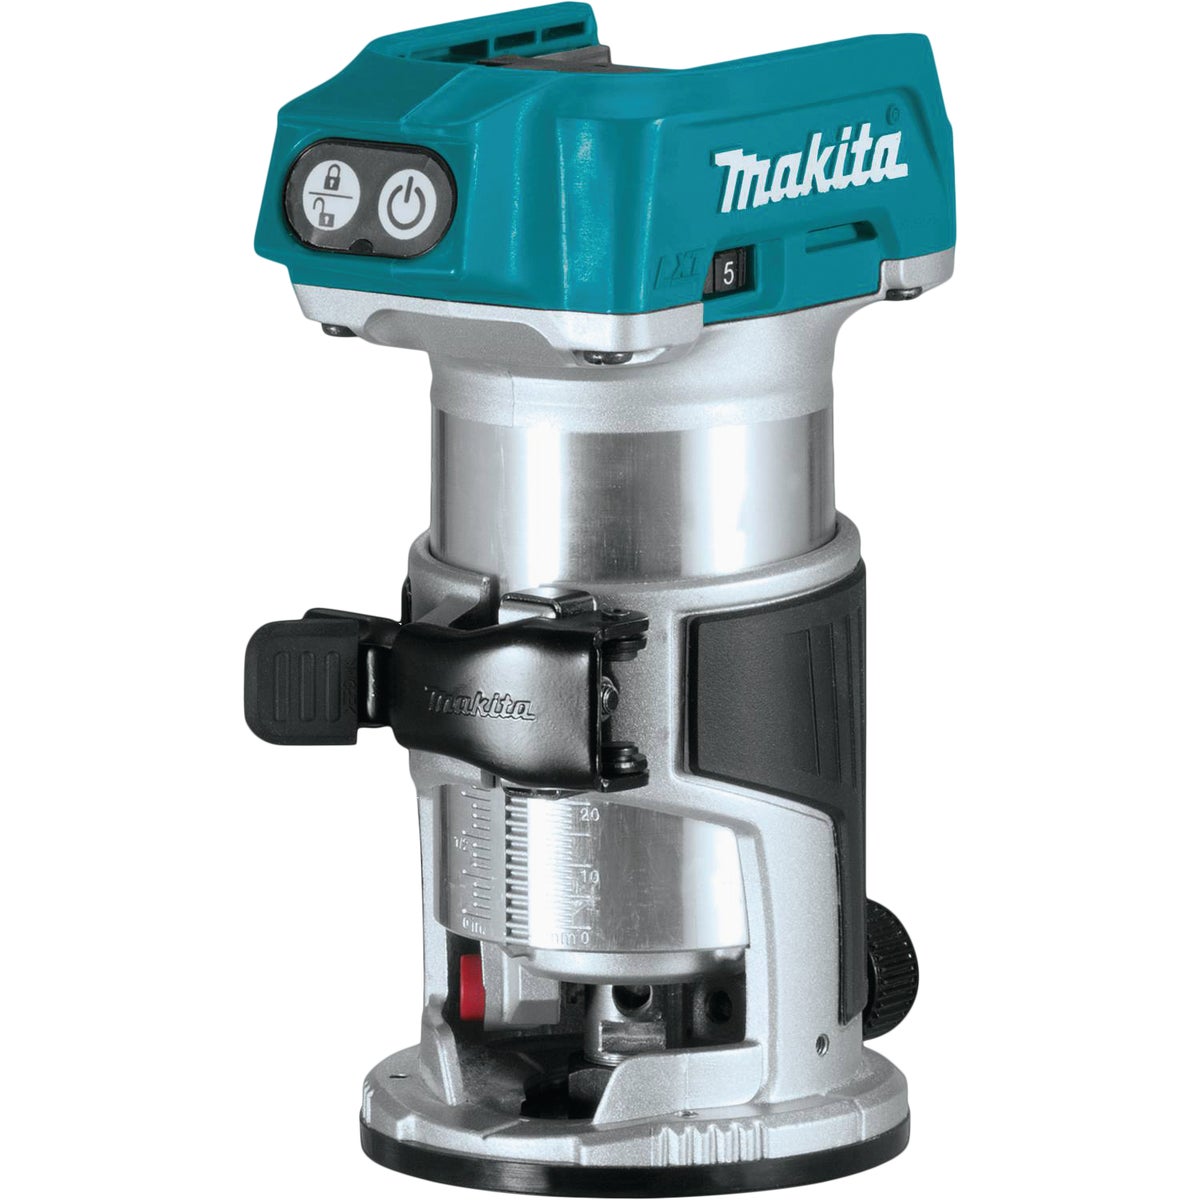 Makita 18 Volt LXT Lithium-Ion Brushless Compact Cordless Router (Tool Only)